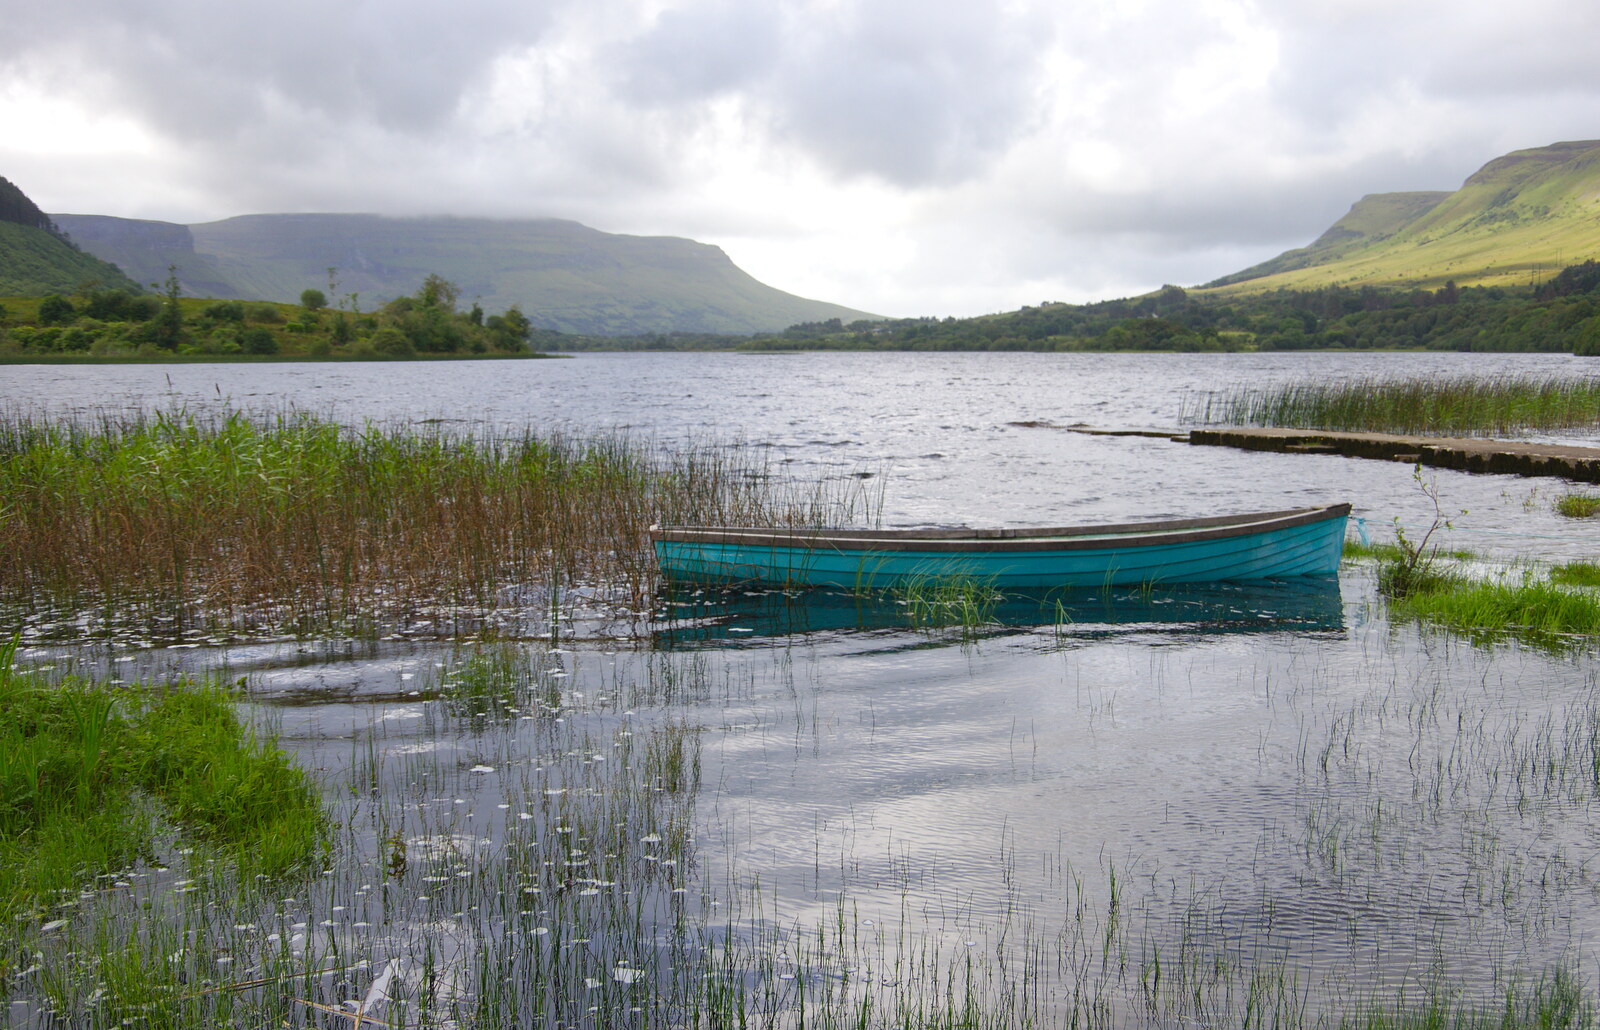 The silent sorrow of empty boats on Lough Glenade from Mullaghmore Beach and Marble Arch Caves, Sligo and Fermanagh, Ireland - 19th August 2019